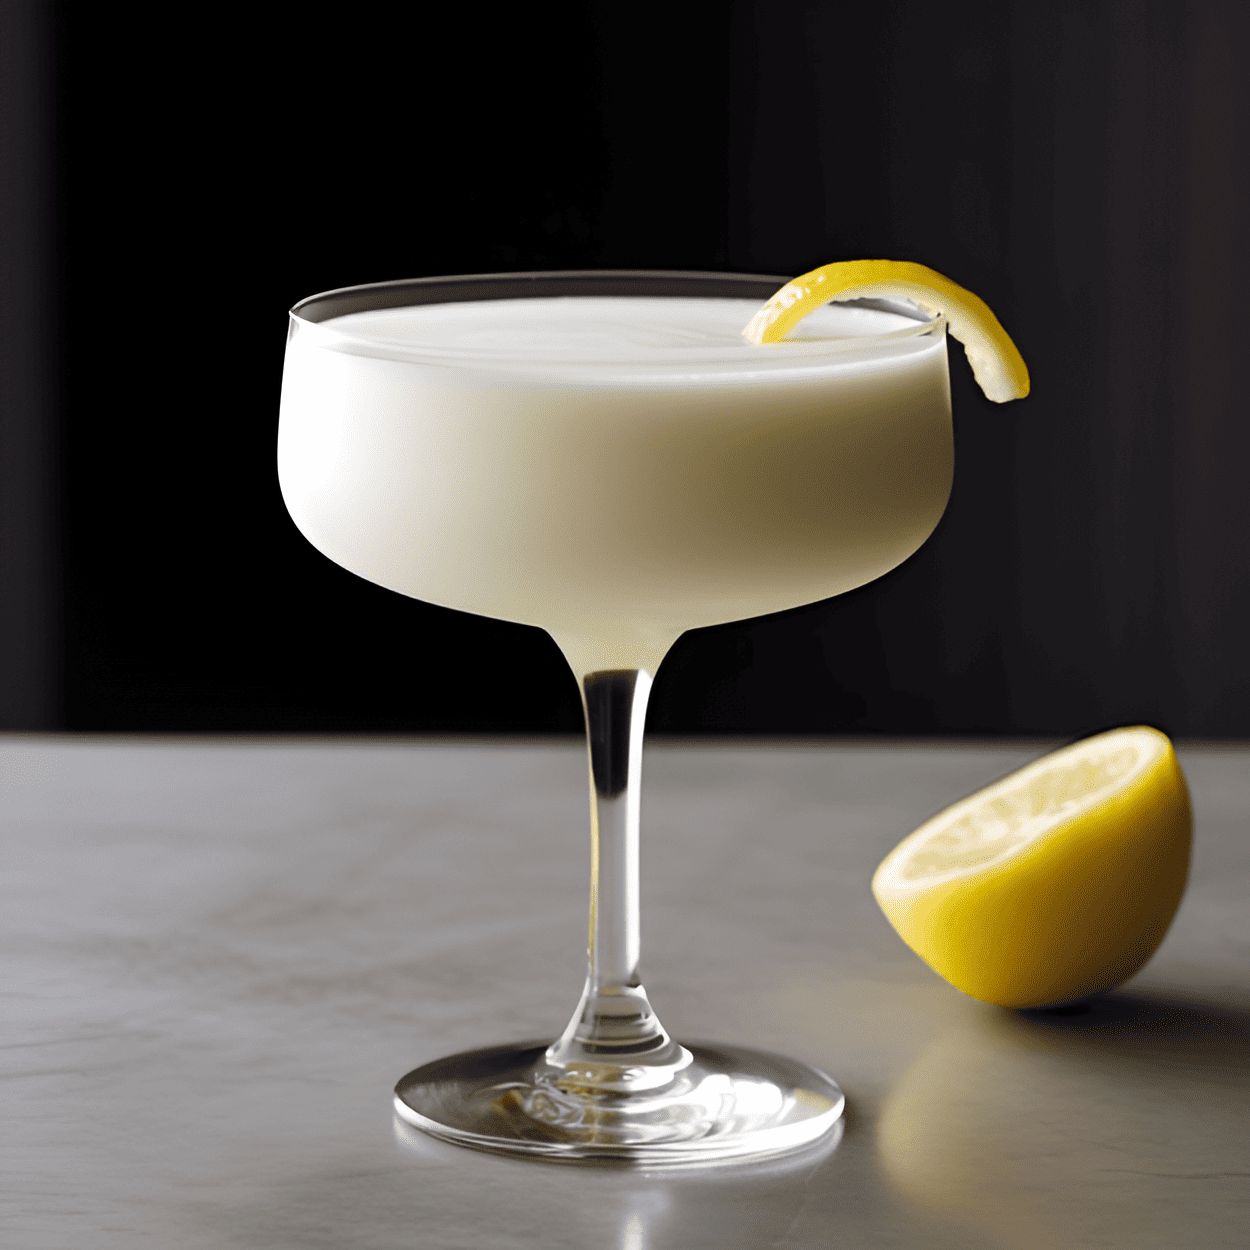 The Tapeworm cocktail has a creamy, tangy taste with a hint of sweetness from the tequila. The mayonnaise adds a rich, velvety texture that is surprisingly pleasant. It's a strong cocktail with a distinct flavor profile.